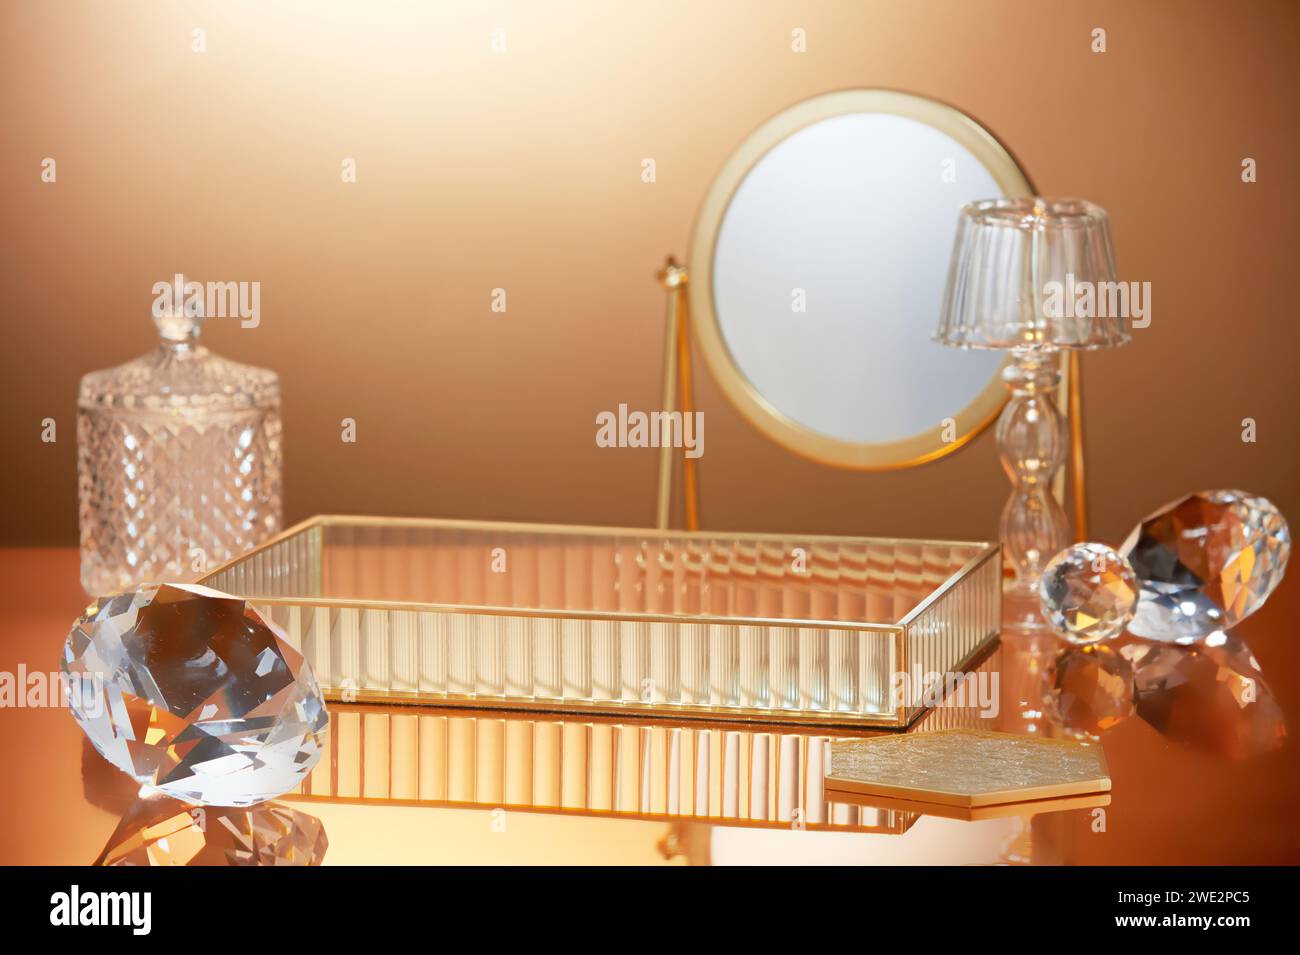 Scene to advertising and branding products with luxury concept. Diamonds, round mirror and tray decorated in backlit gold background. Space for design Stock Photo